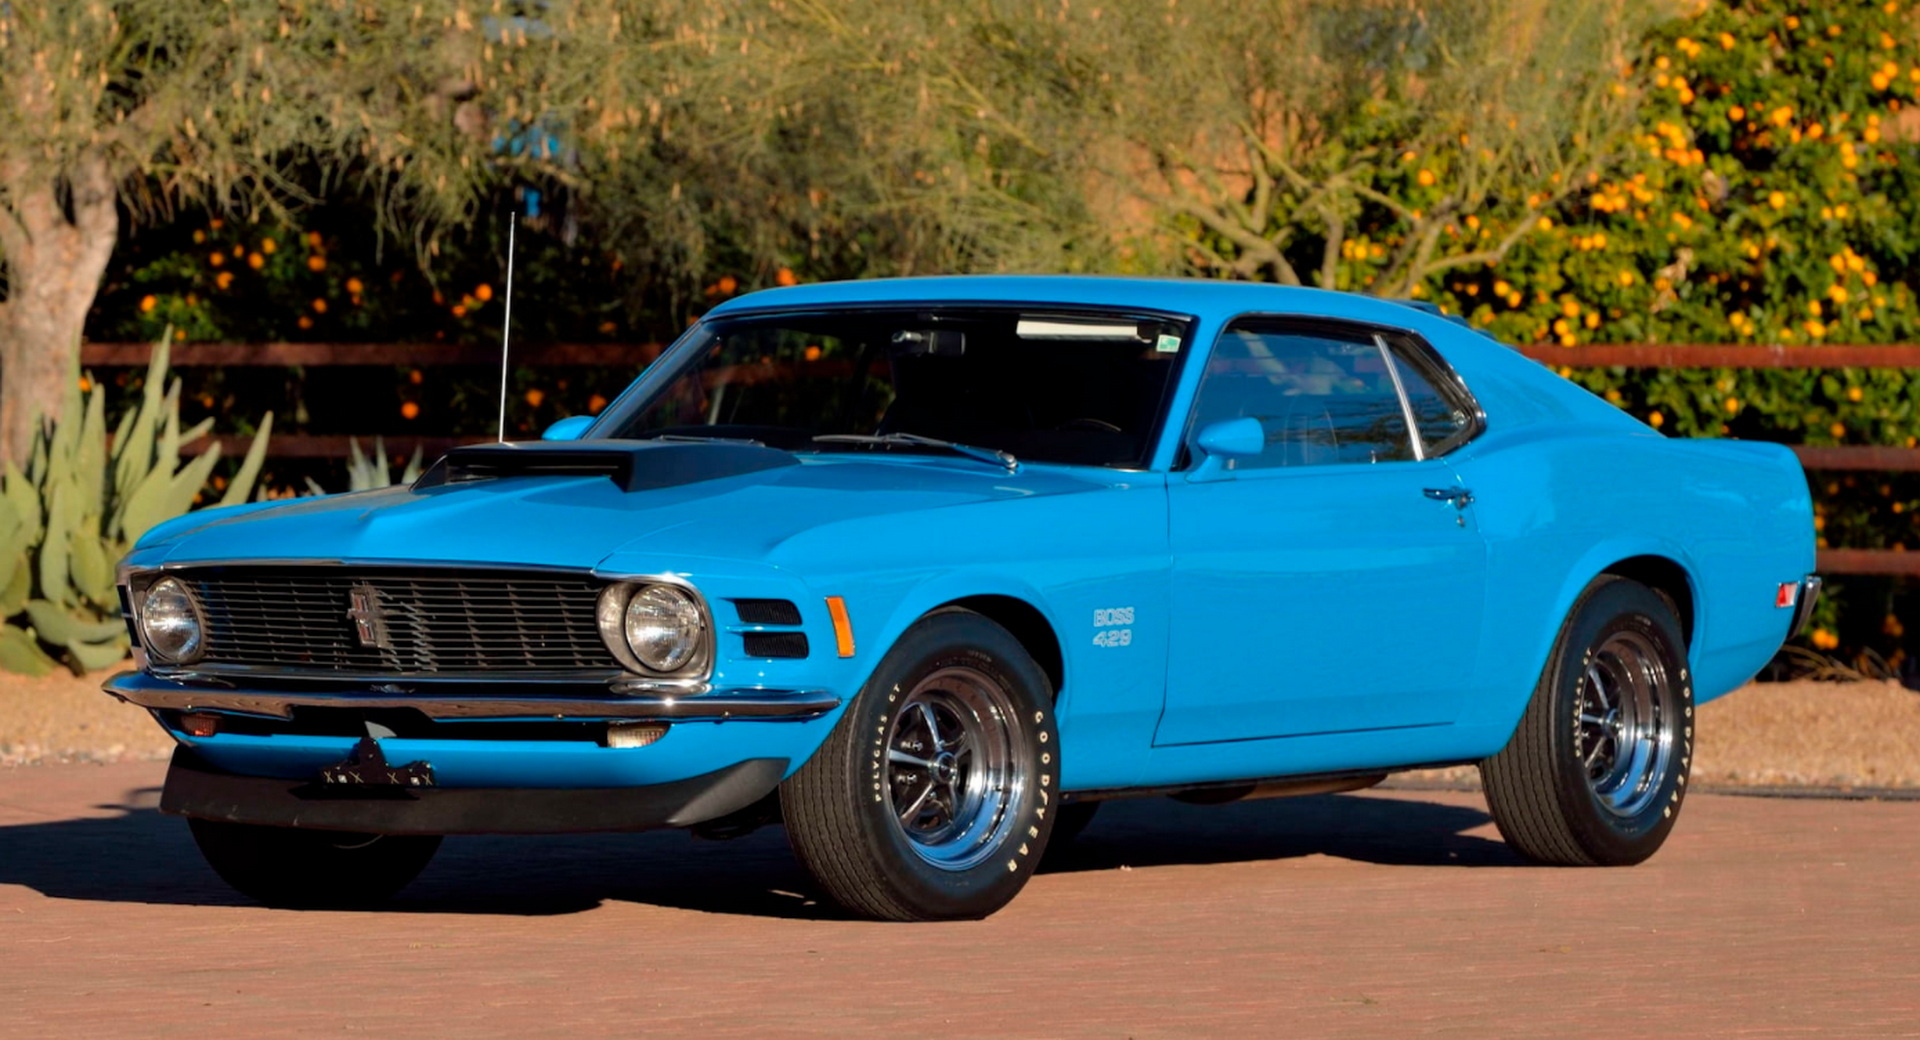 undtagelse sæt ind amme 1 of 499 1970 Ford Mustang Boss 429 Fastback Crossing The Auction Block |  Carscoops